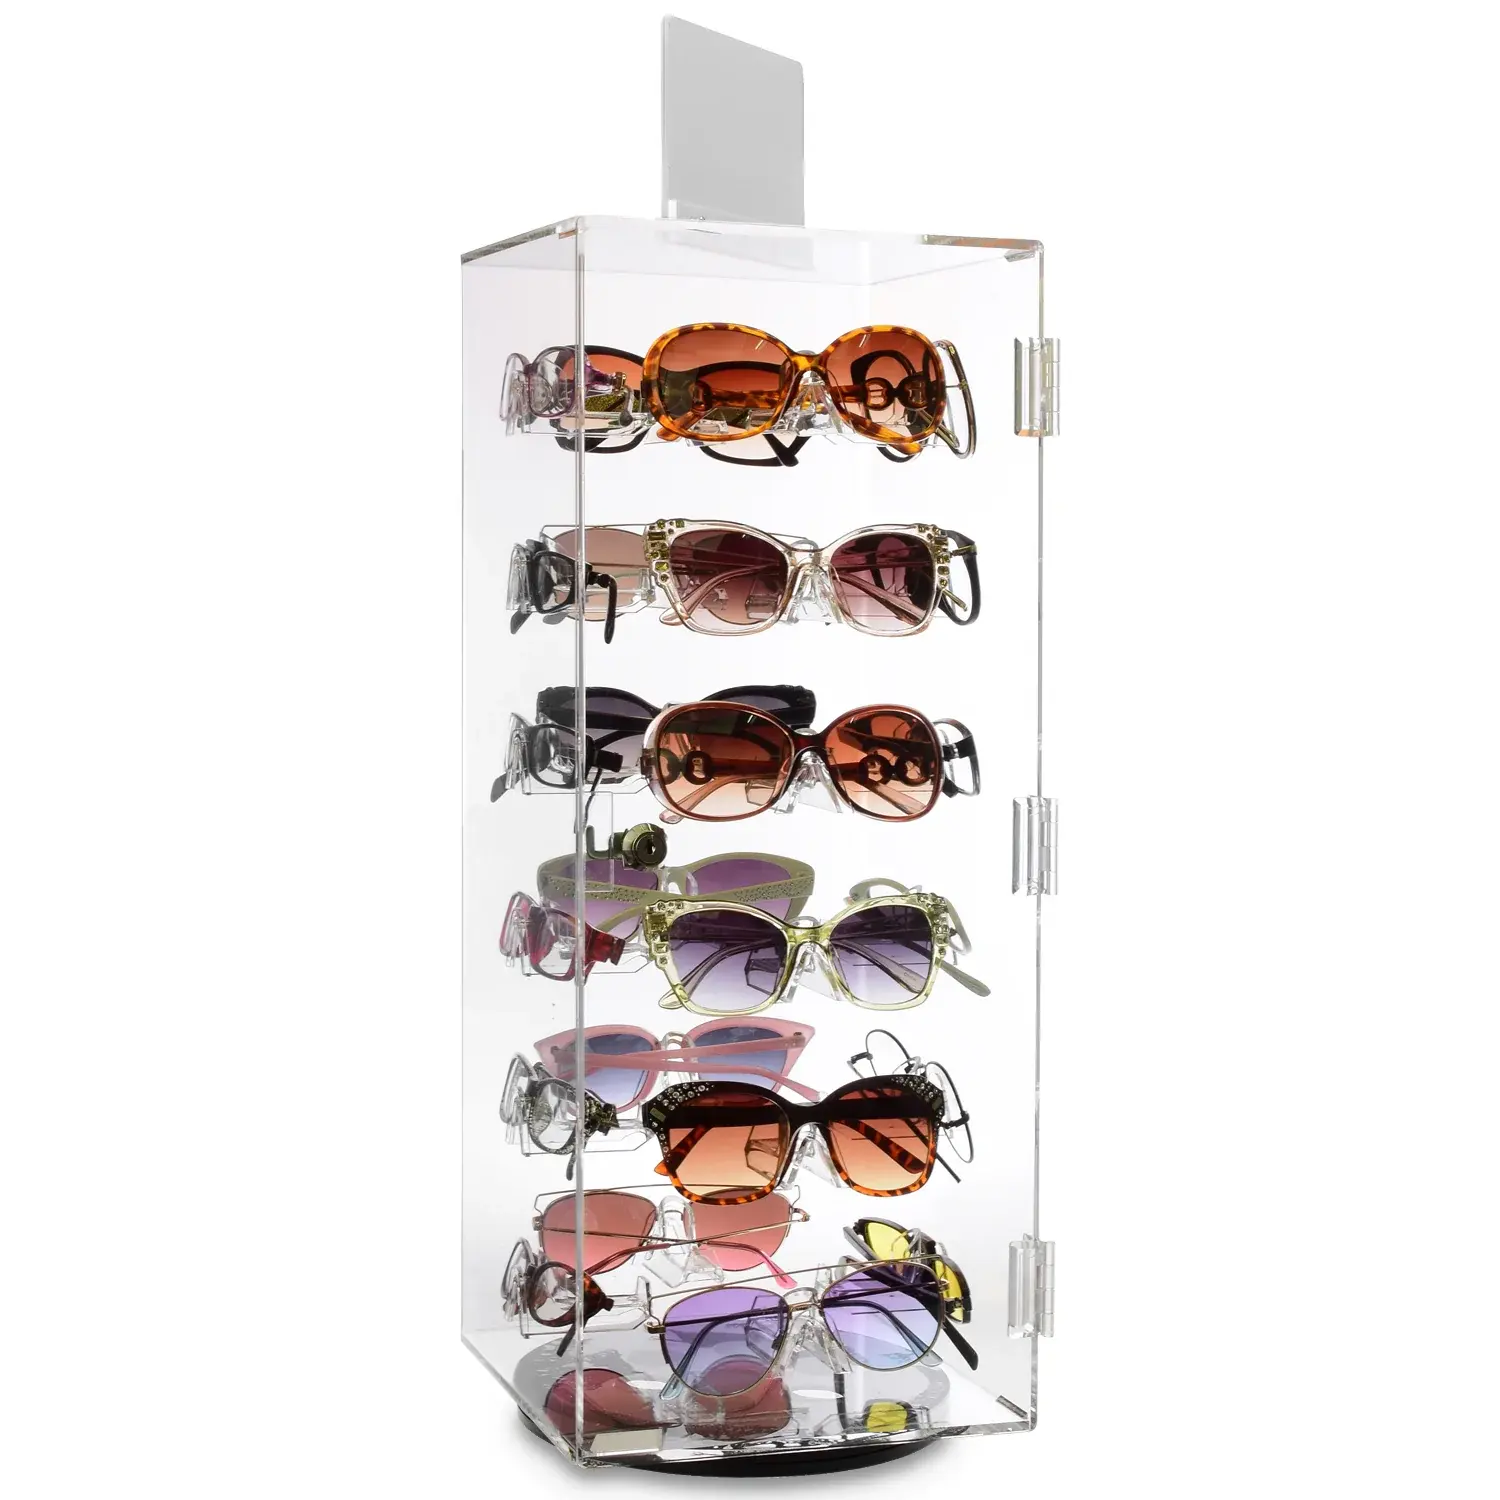 tinya factory optical store display furniture 24 sunglasses display stand 360 rotating clear acrylic eyeglasses display case